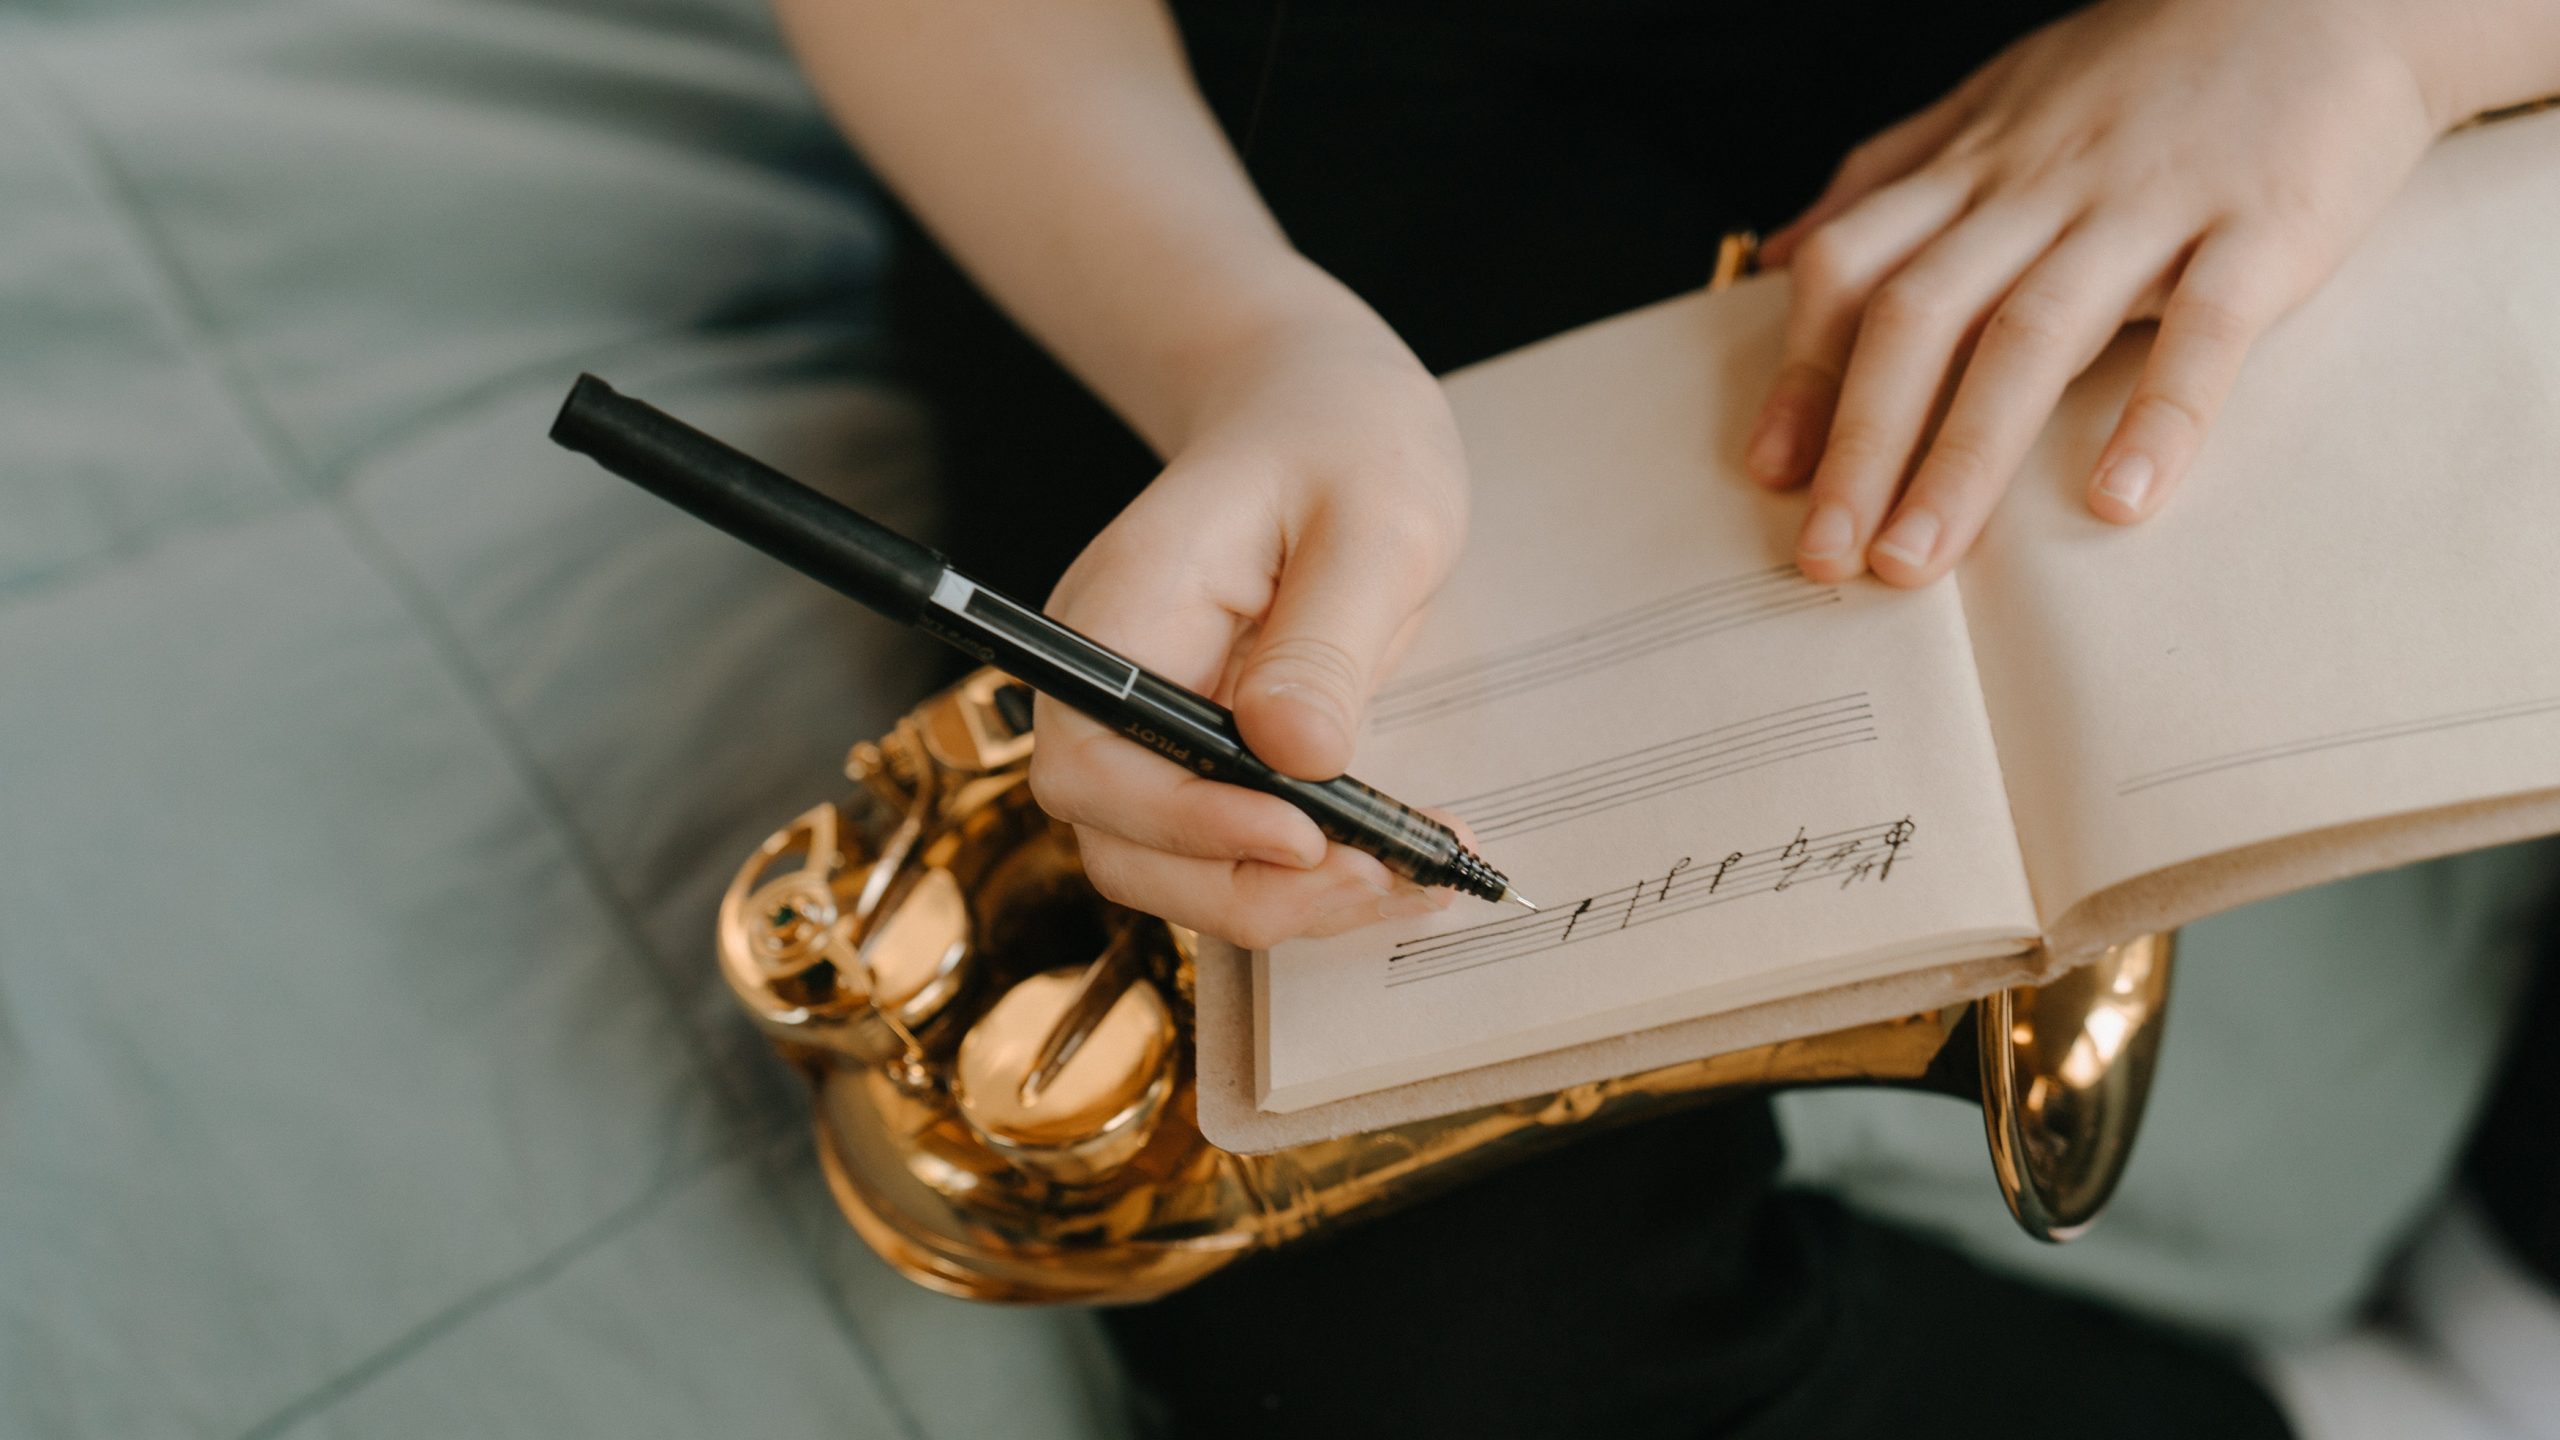 A notebook with music notation being written in it with a pen. Below the notebook is a saxophone resting on a leg. The top of a green duvet is visible.